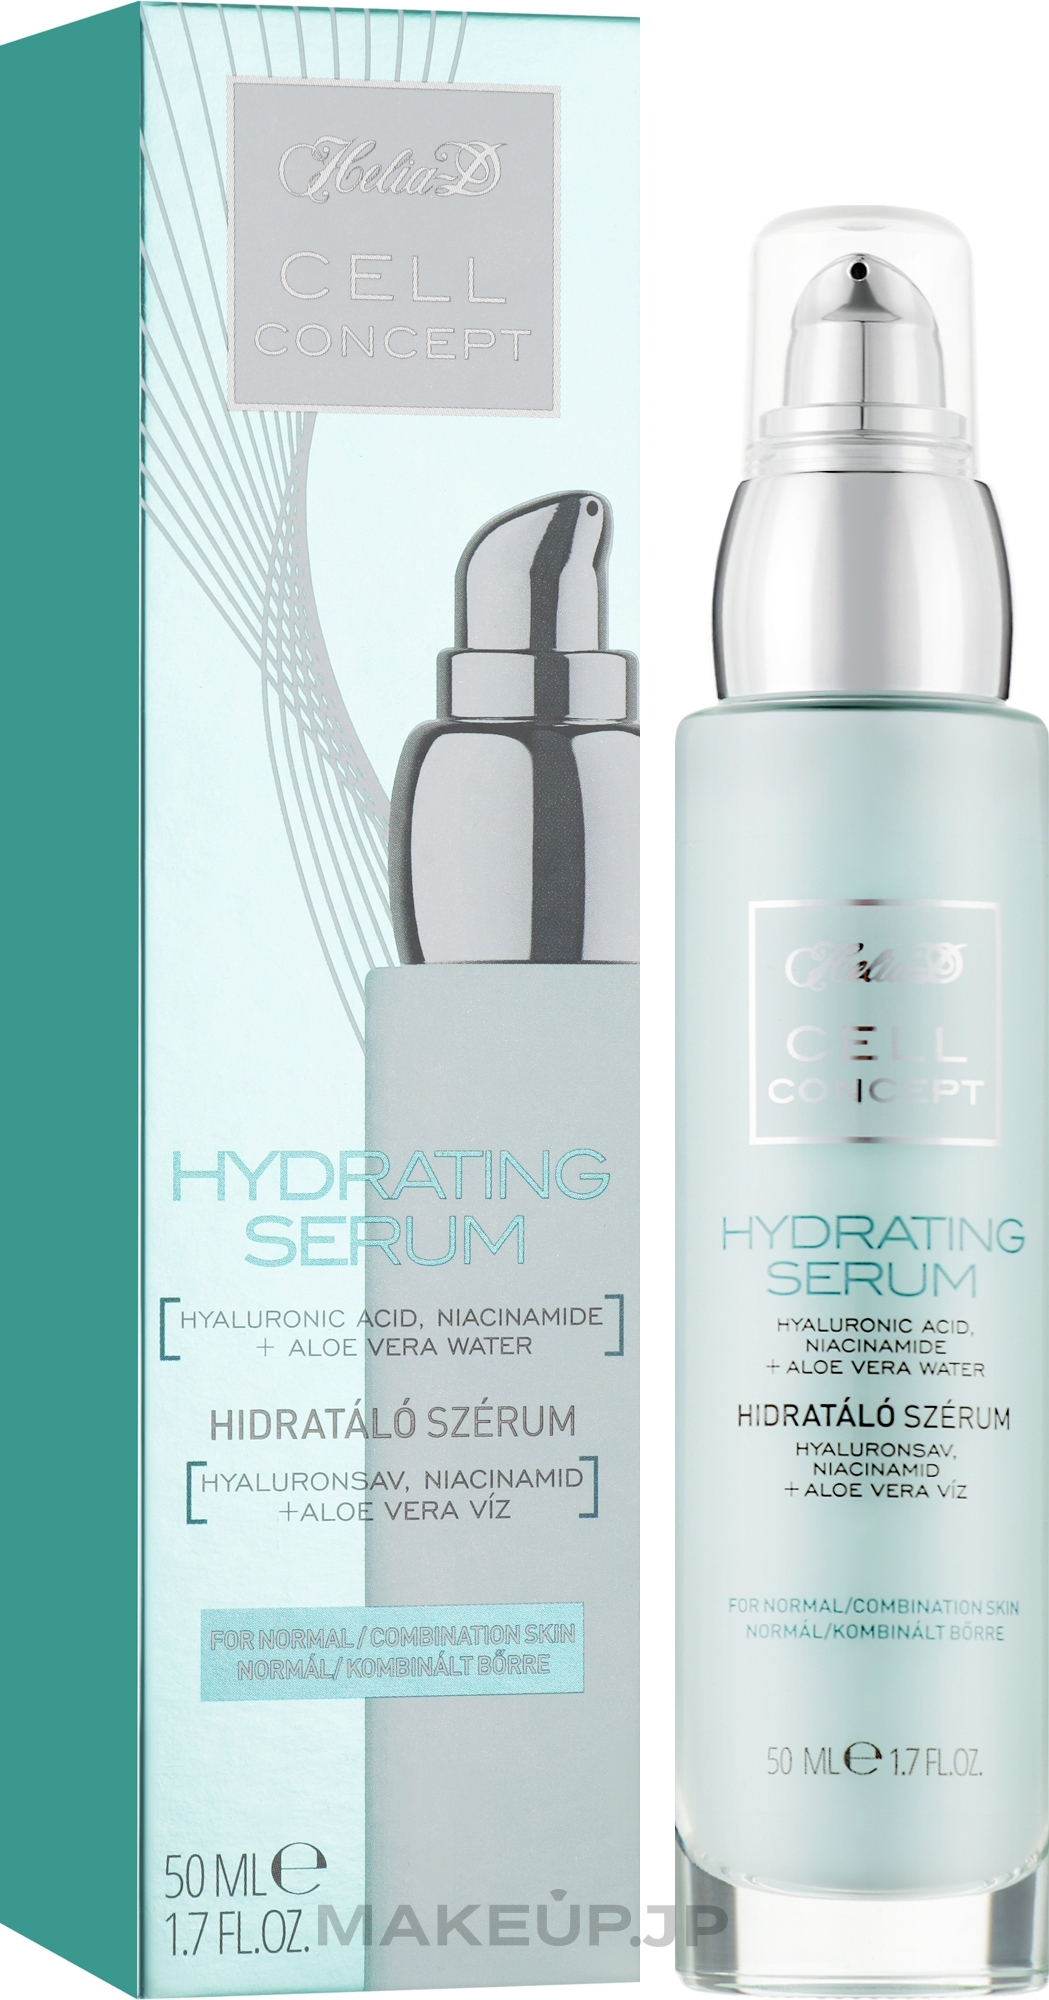 Moisturizing Serum for Normal & Combination Skin 35+ - Helia-D Cell Concept Hydrating Serum — photo 50 ml